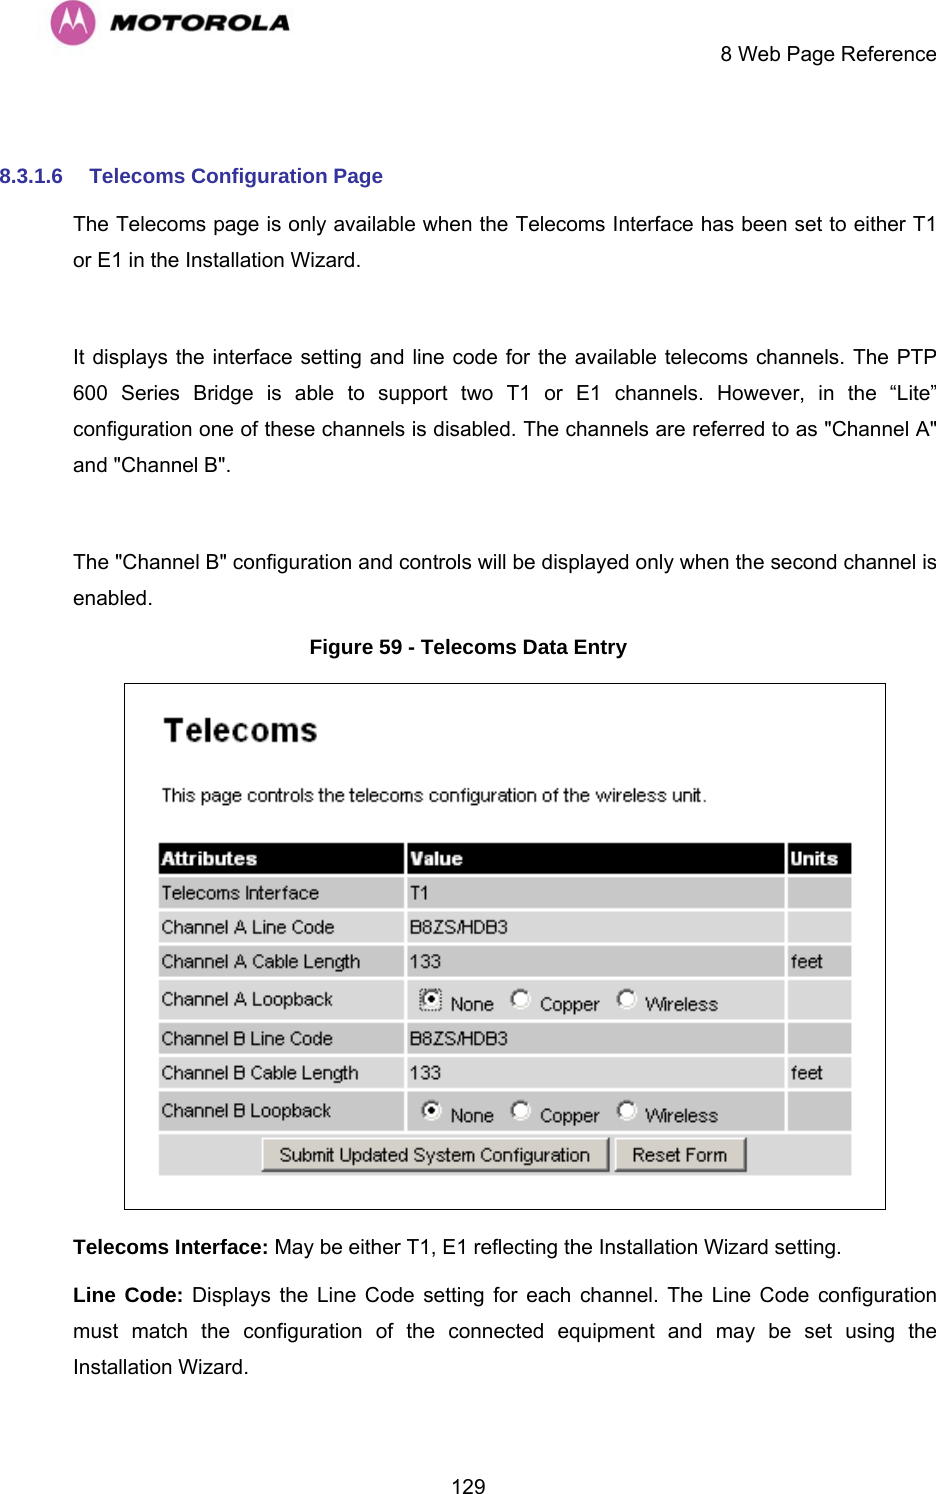     8 Web Page Reference  129 8.3.1.6  Telecoms Configuration Page The Telecoms page is only available when the Telecoms Interface has been set to either T1 or E1 in the Installation Wizard.   It displays the interface setting and line code for the available telecoms channels. The PTP 600 Series Bridge is able to support two T1 or E1 channels. However, in the “Lite” configuration one of these channels is disabled. The channels are referred to as &quot;Channel A&quot; and &quot;Channel B&quot;.  The &quot;Channel B&quot; configuration and controls will be displayed only when the second channel is enabled.  Figure 59 - Telecoms Data Entry  Telecoms Interface: May be either T1, E1 reflecting the Installation Wizard setting. Line Code: Displays the Line Code setting for each channel. The Line Code configuration must match the configuration of the connected equipment and may be set using the Installation Wizard.  